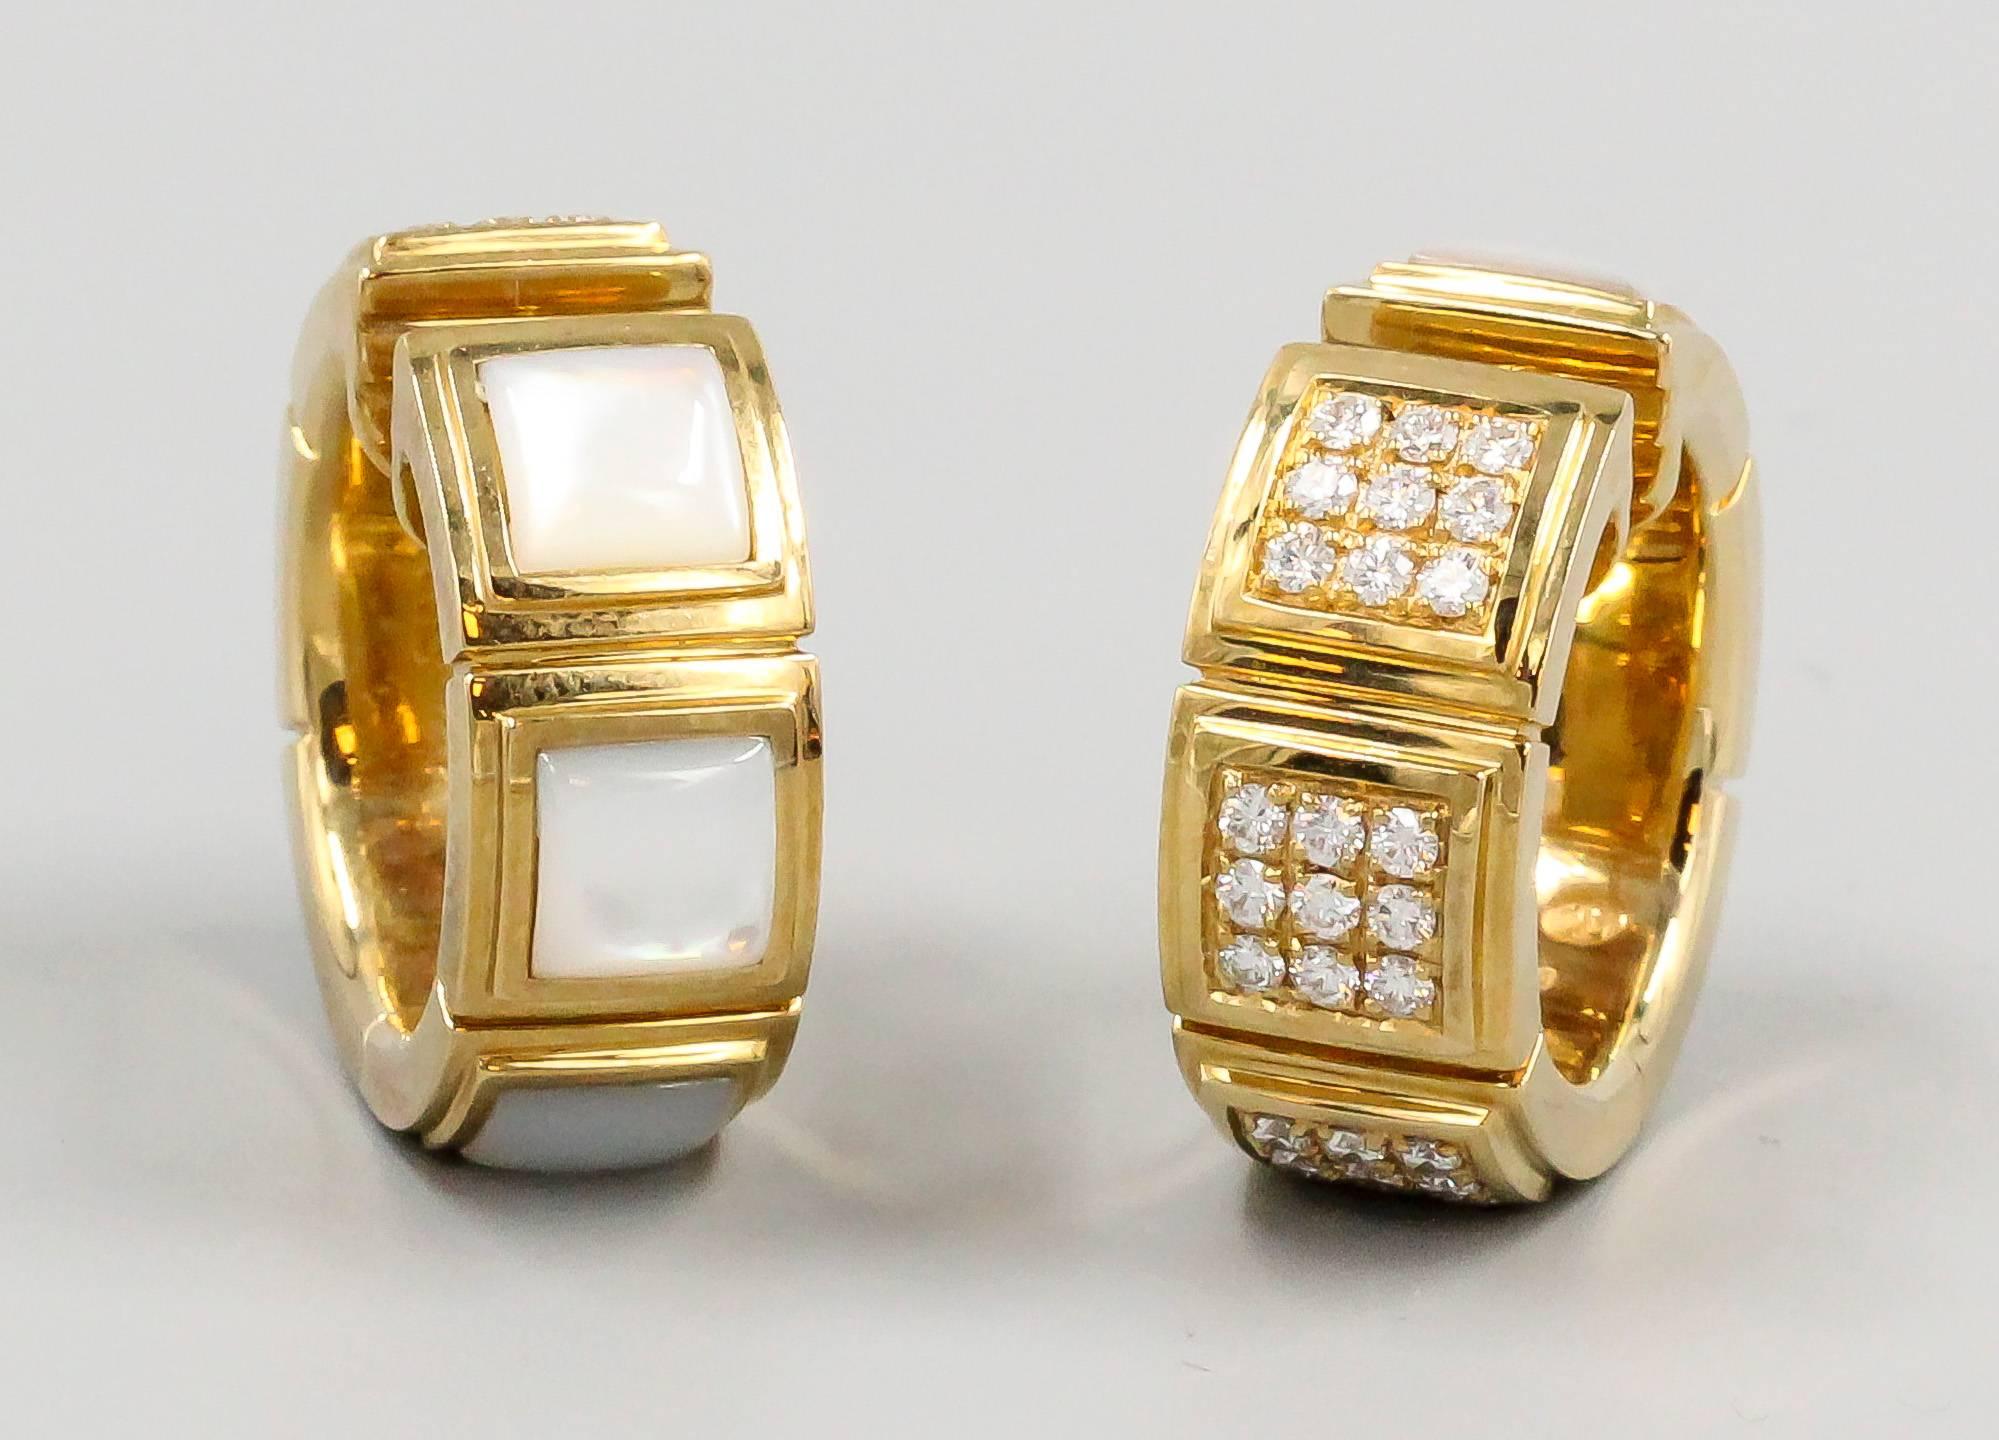 Stylish diamond, mother of pearl and 18K yellow gold earrings by Mauboussin Paris. They feature very high grade round brilliant cut diamonds, approx. total weight; as well as mother of pearl. These are interesting because they can be worn with